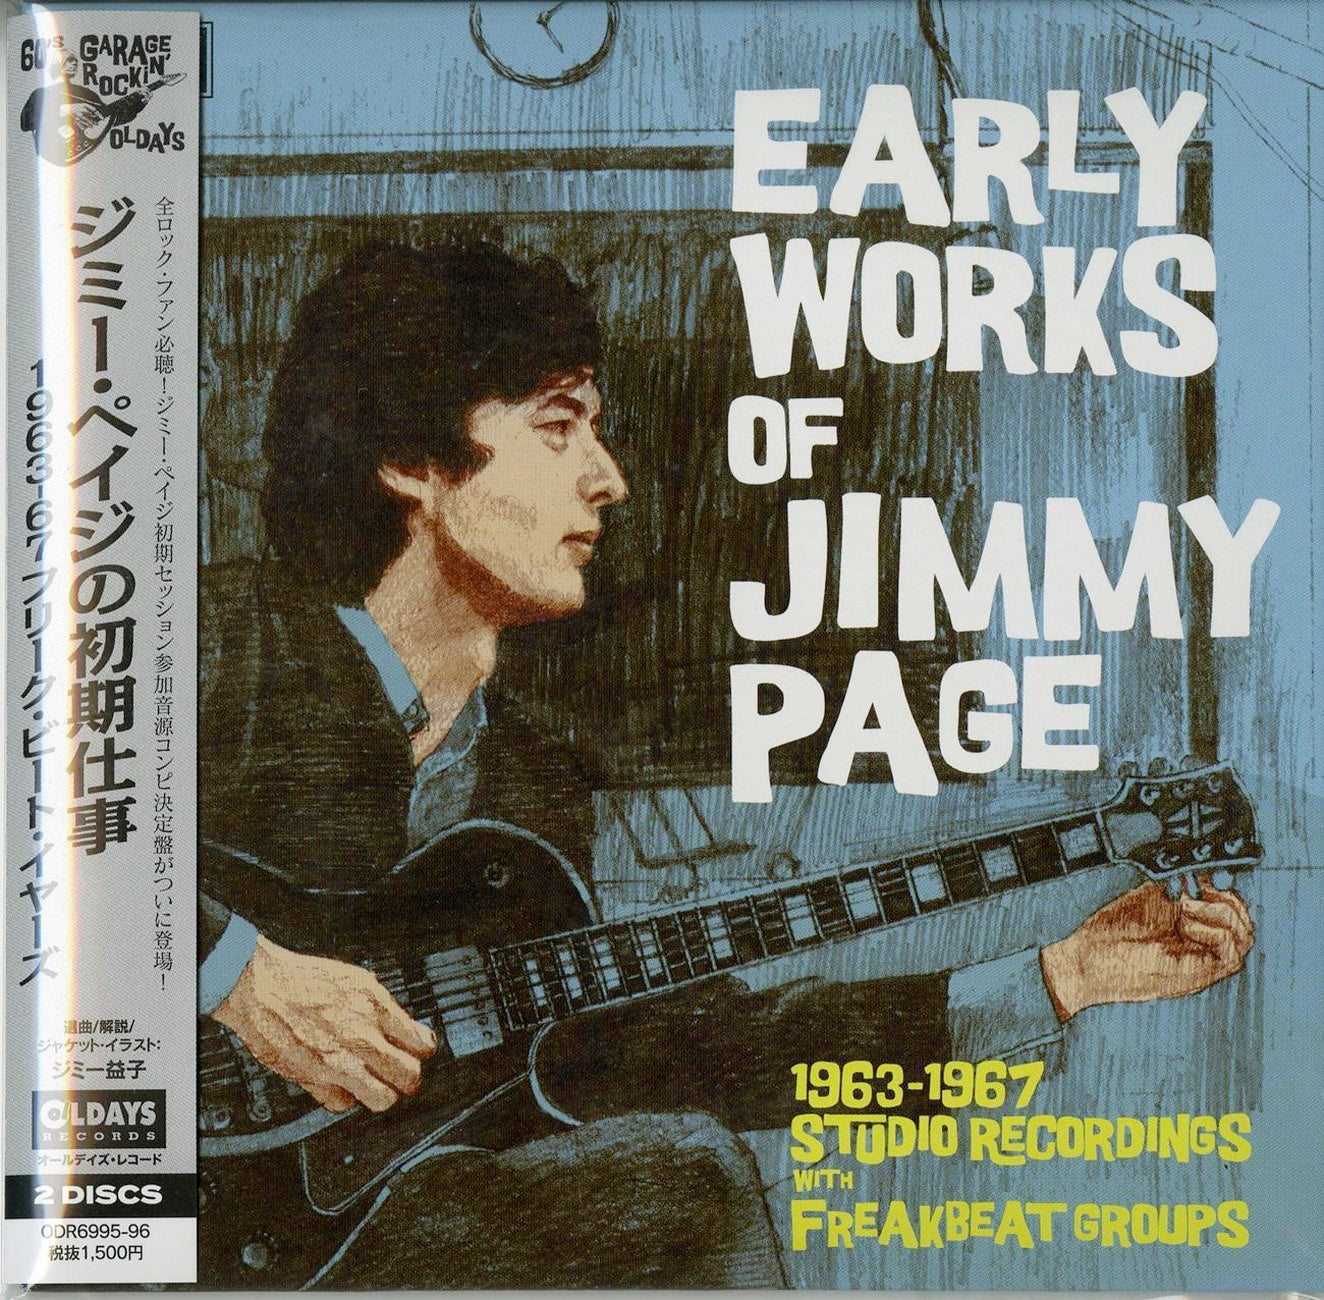 V.A. - Early Works Of Jimmy Page 1963-1967 Studio Recordings With Frea –  CDs Vinyl Japan Store CD, Hard Rock, Mini LP CD, Rock, V.A. CDs